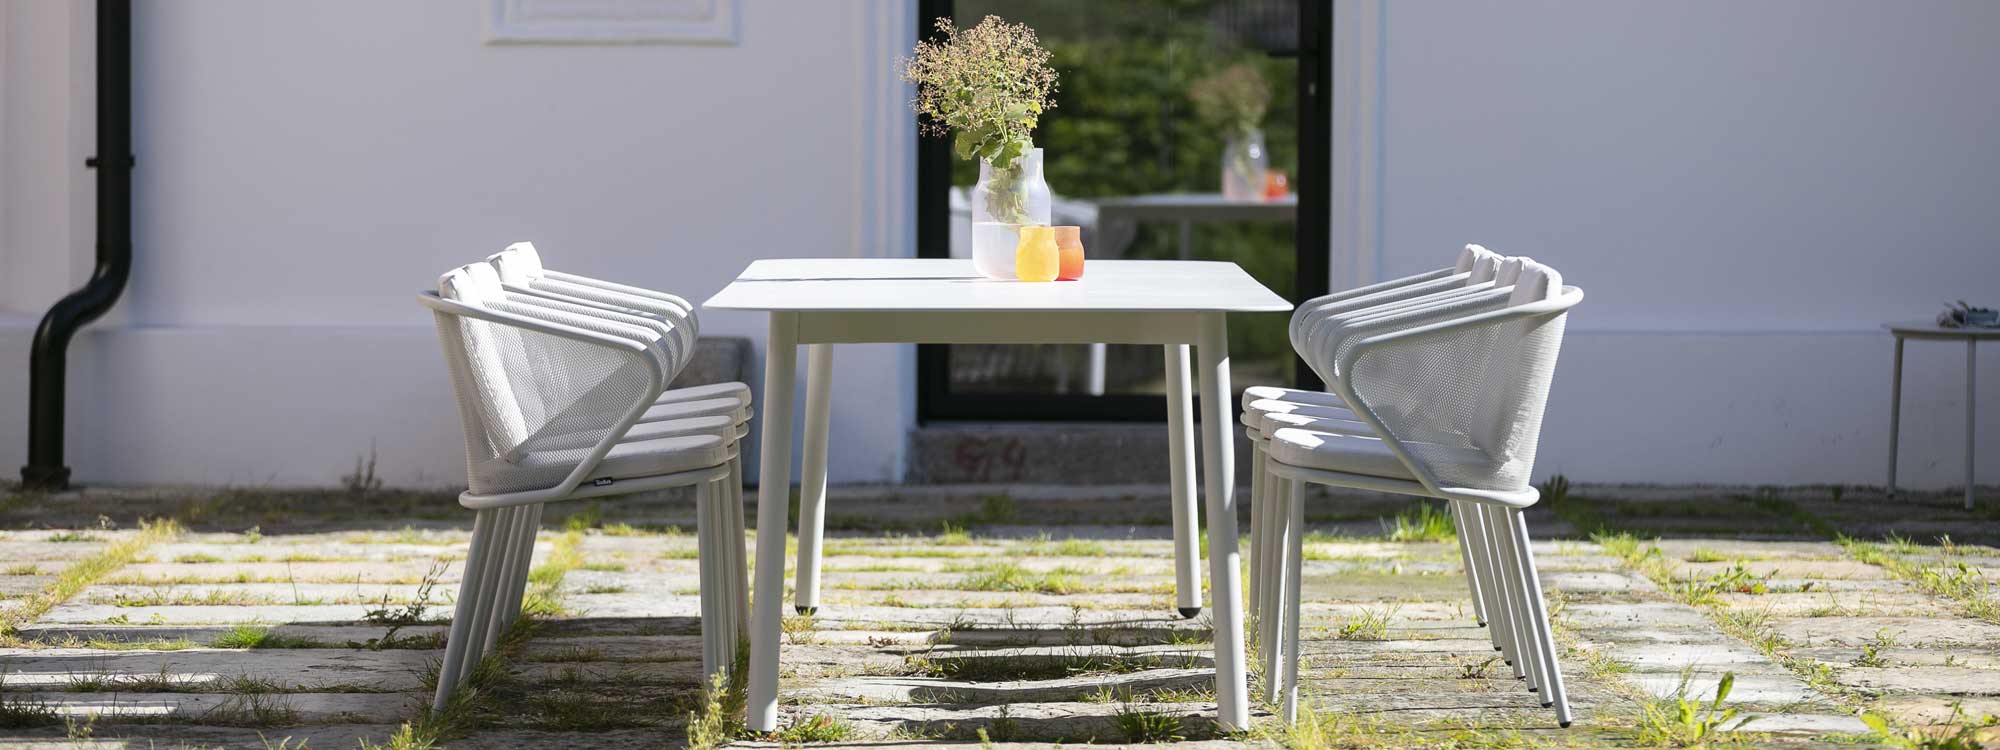 Condor 10 seat garden dining set in White on rustic terrace